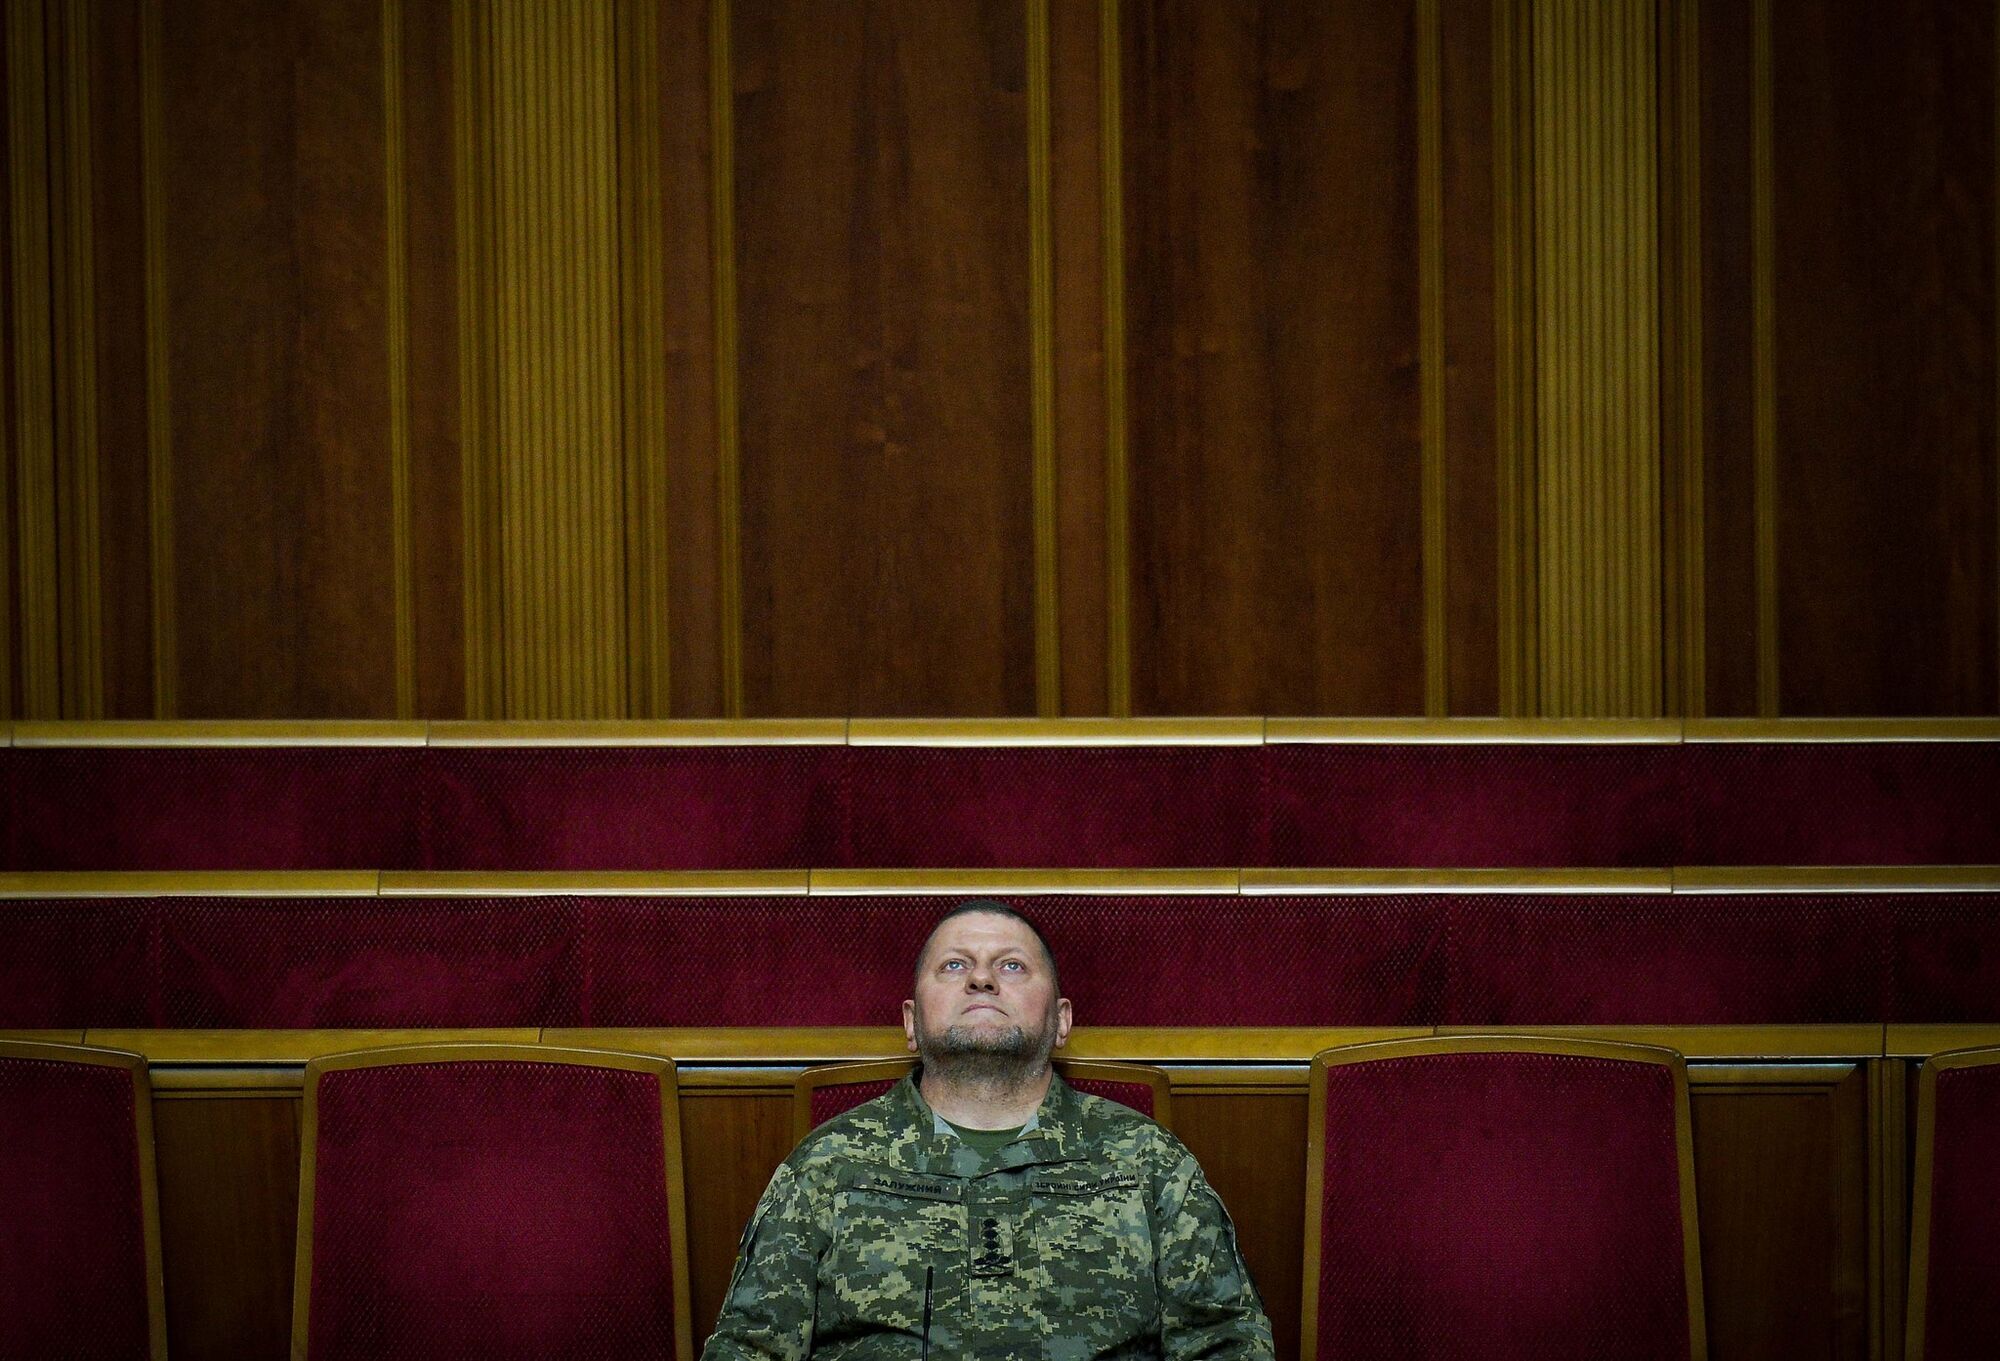 In tears, on his knees, and with a victory sign: the most powerful photos of Valerii Zaluzhnyi that went viral